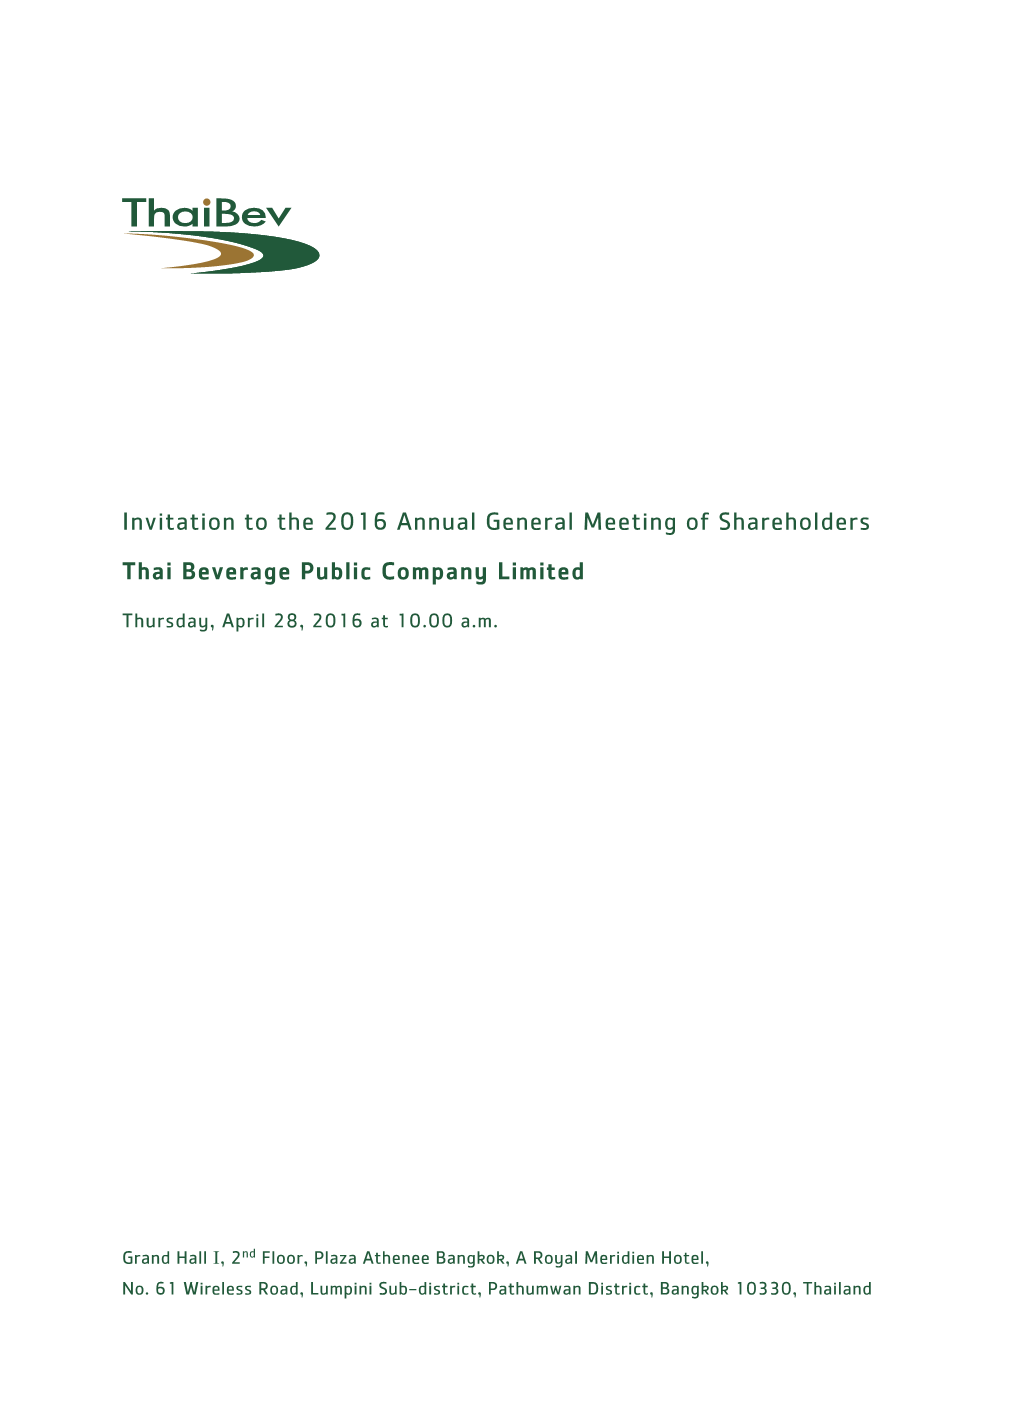 Invitation to the 2016 Annual General Meeting of Shareholders Thai Beverage Public Company Limited